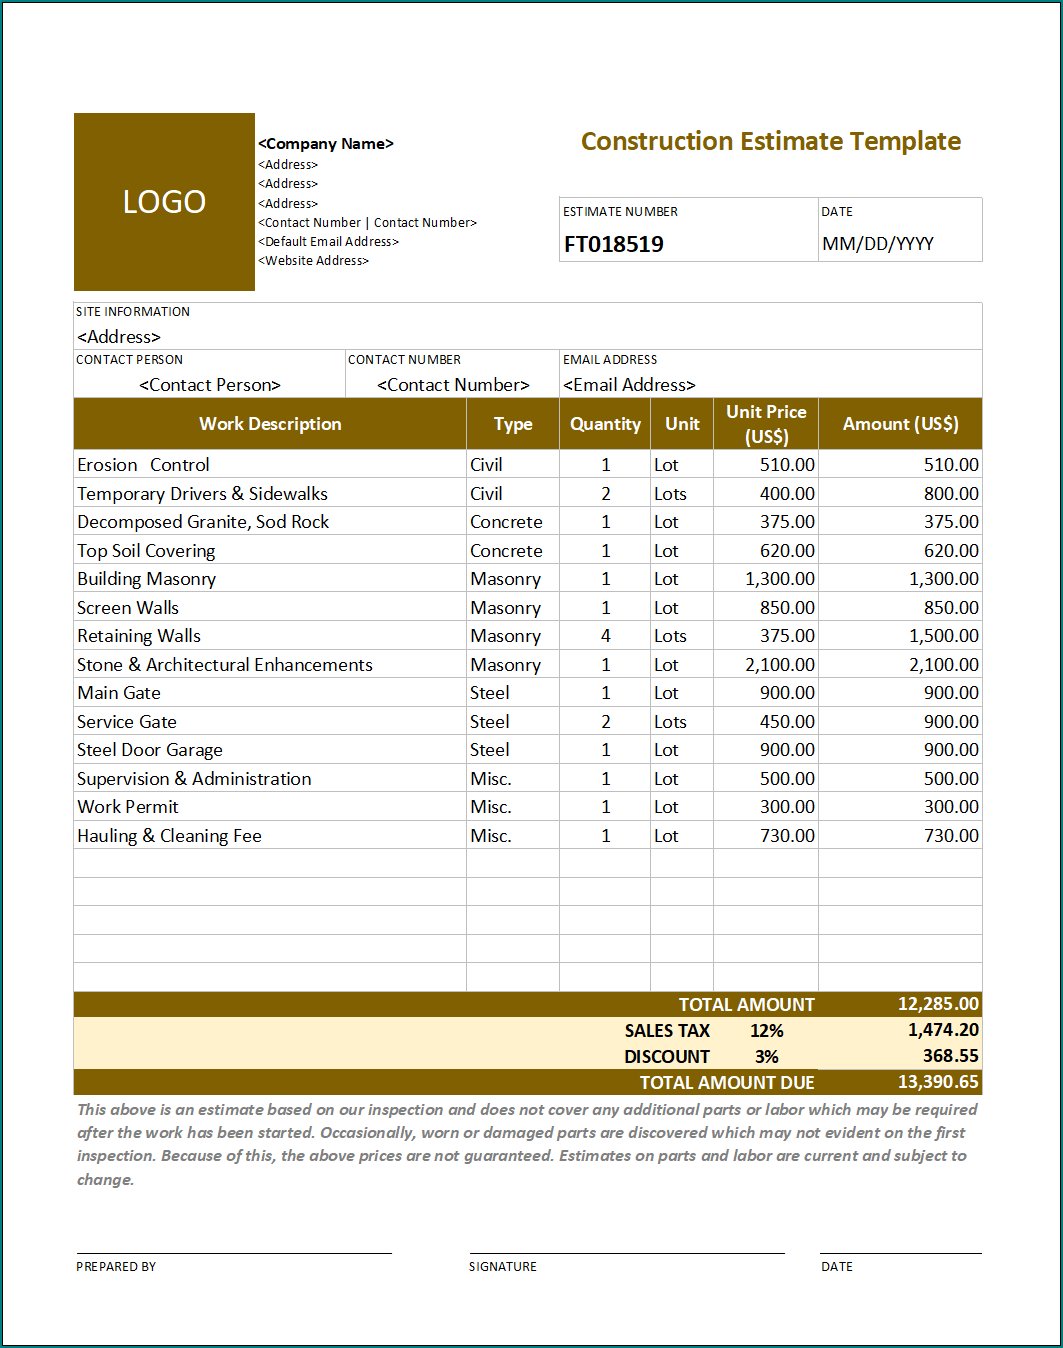 Example of Estimate Sheets For Contractors